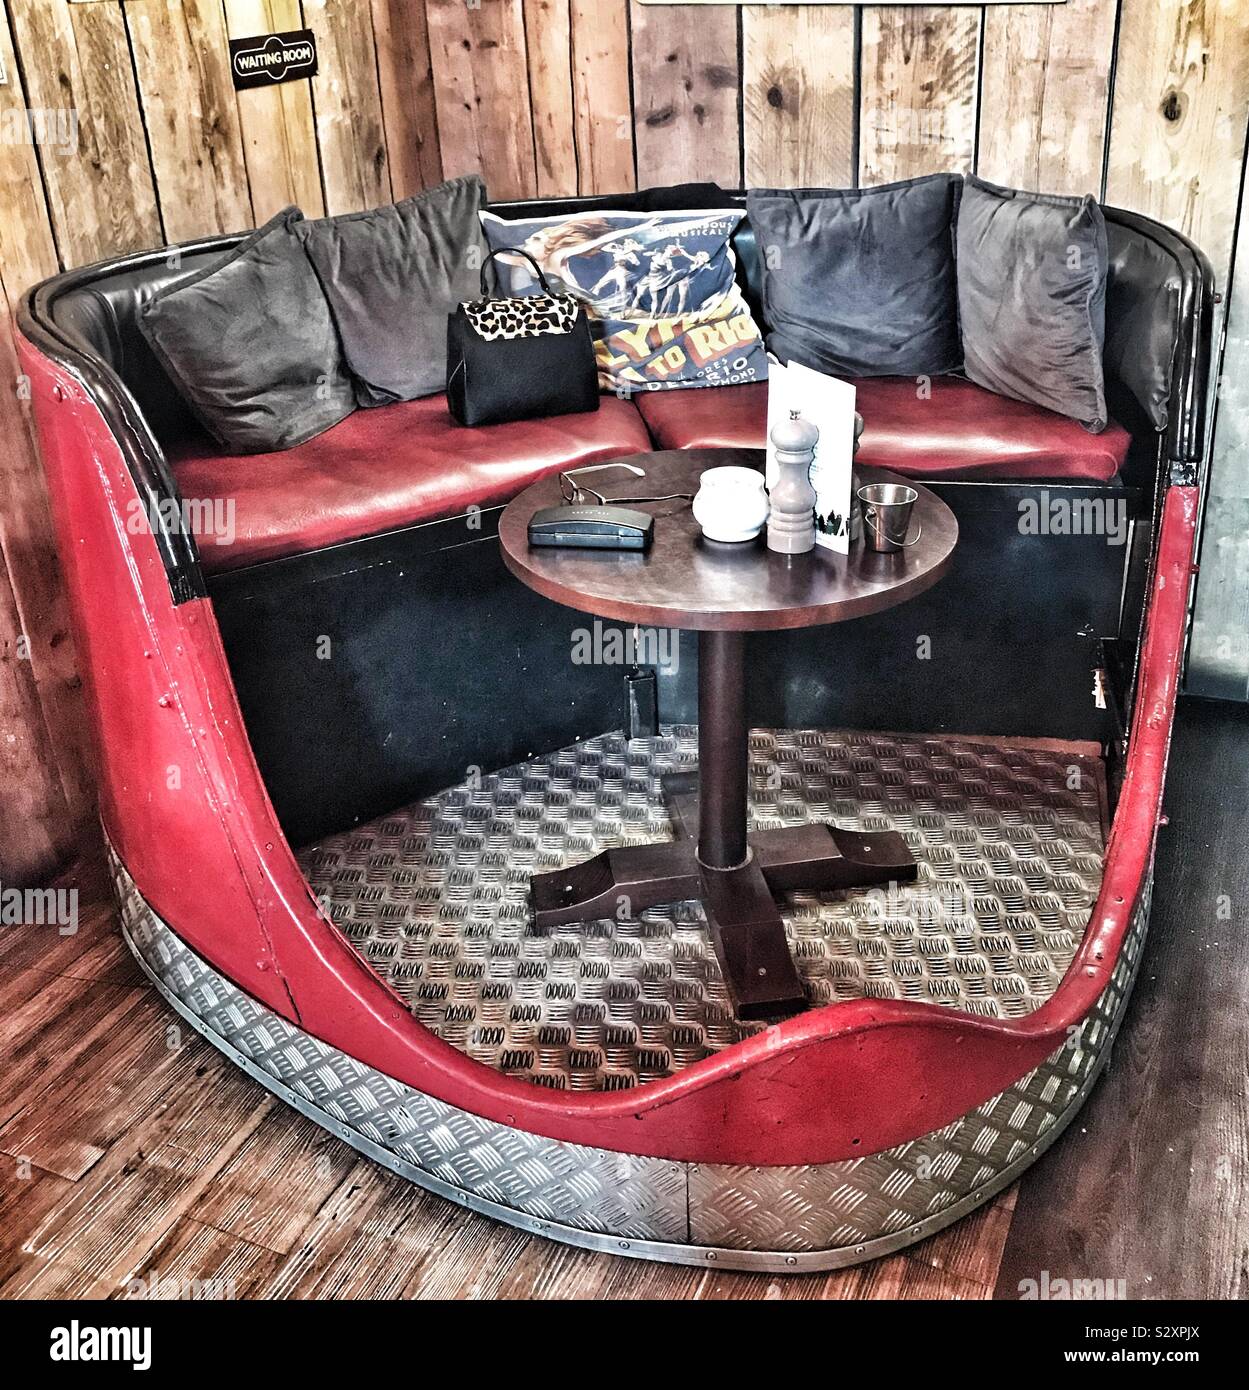 Fairground Waltzer Seat Made into Tea Room Seating Area with Small Wooden Table In it and Cushions On The Seats - Welshpool, Wales Stock Photo